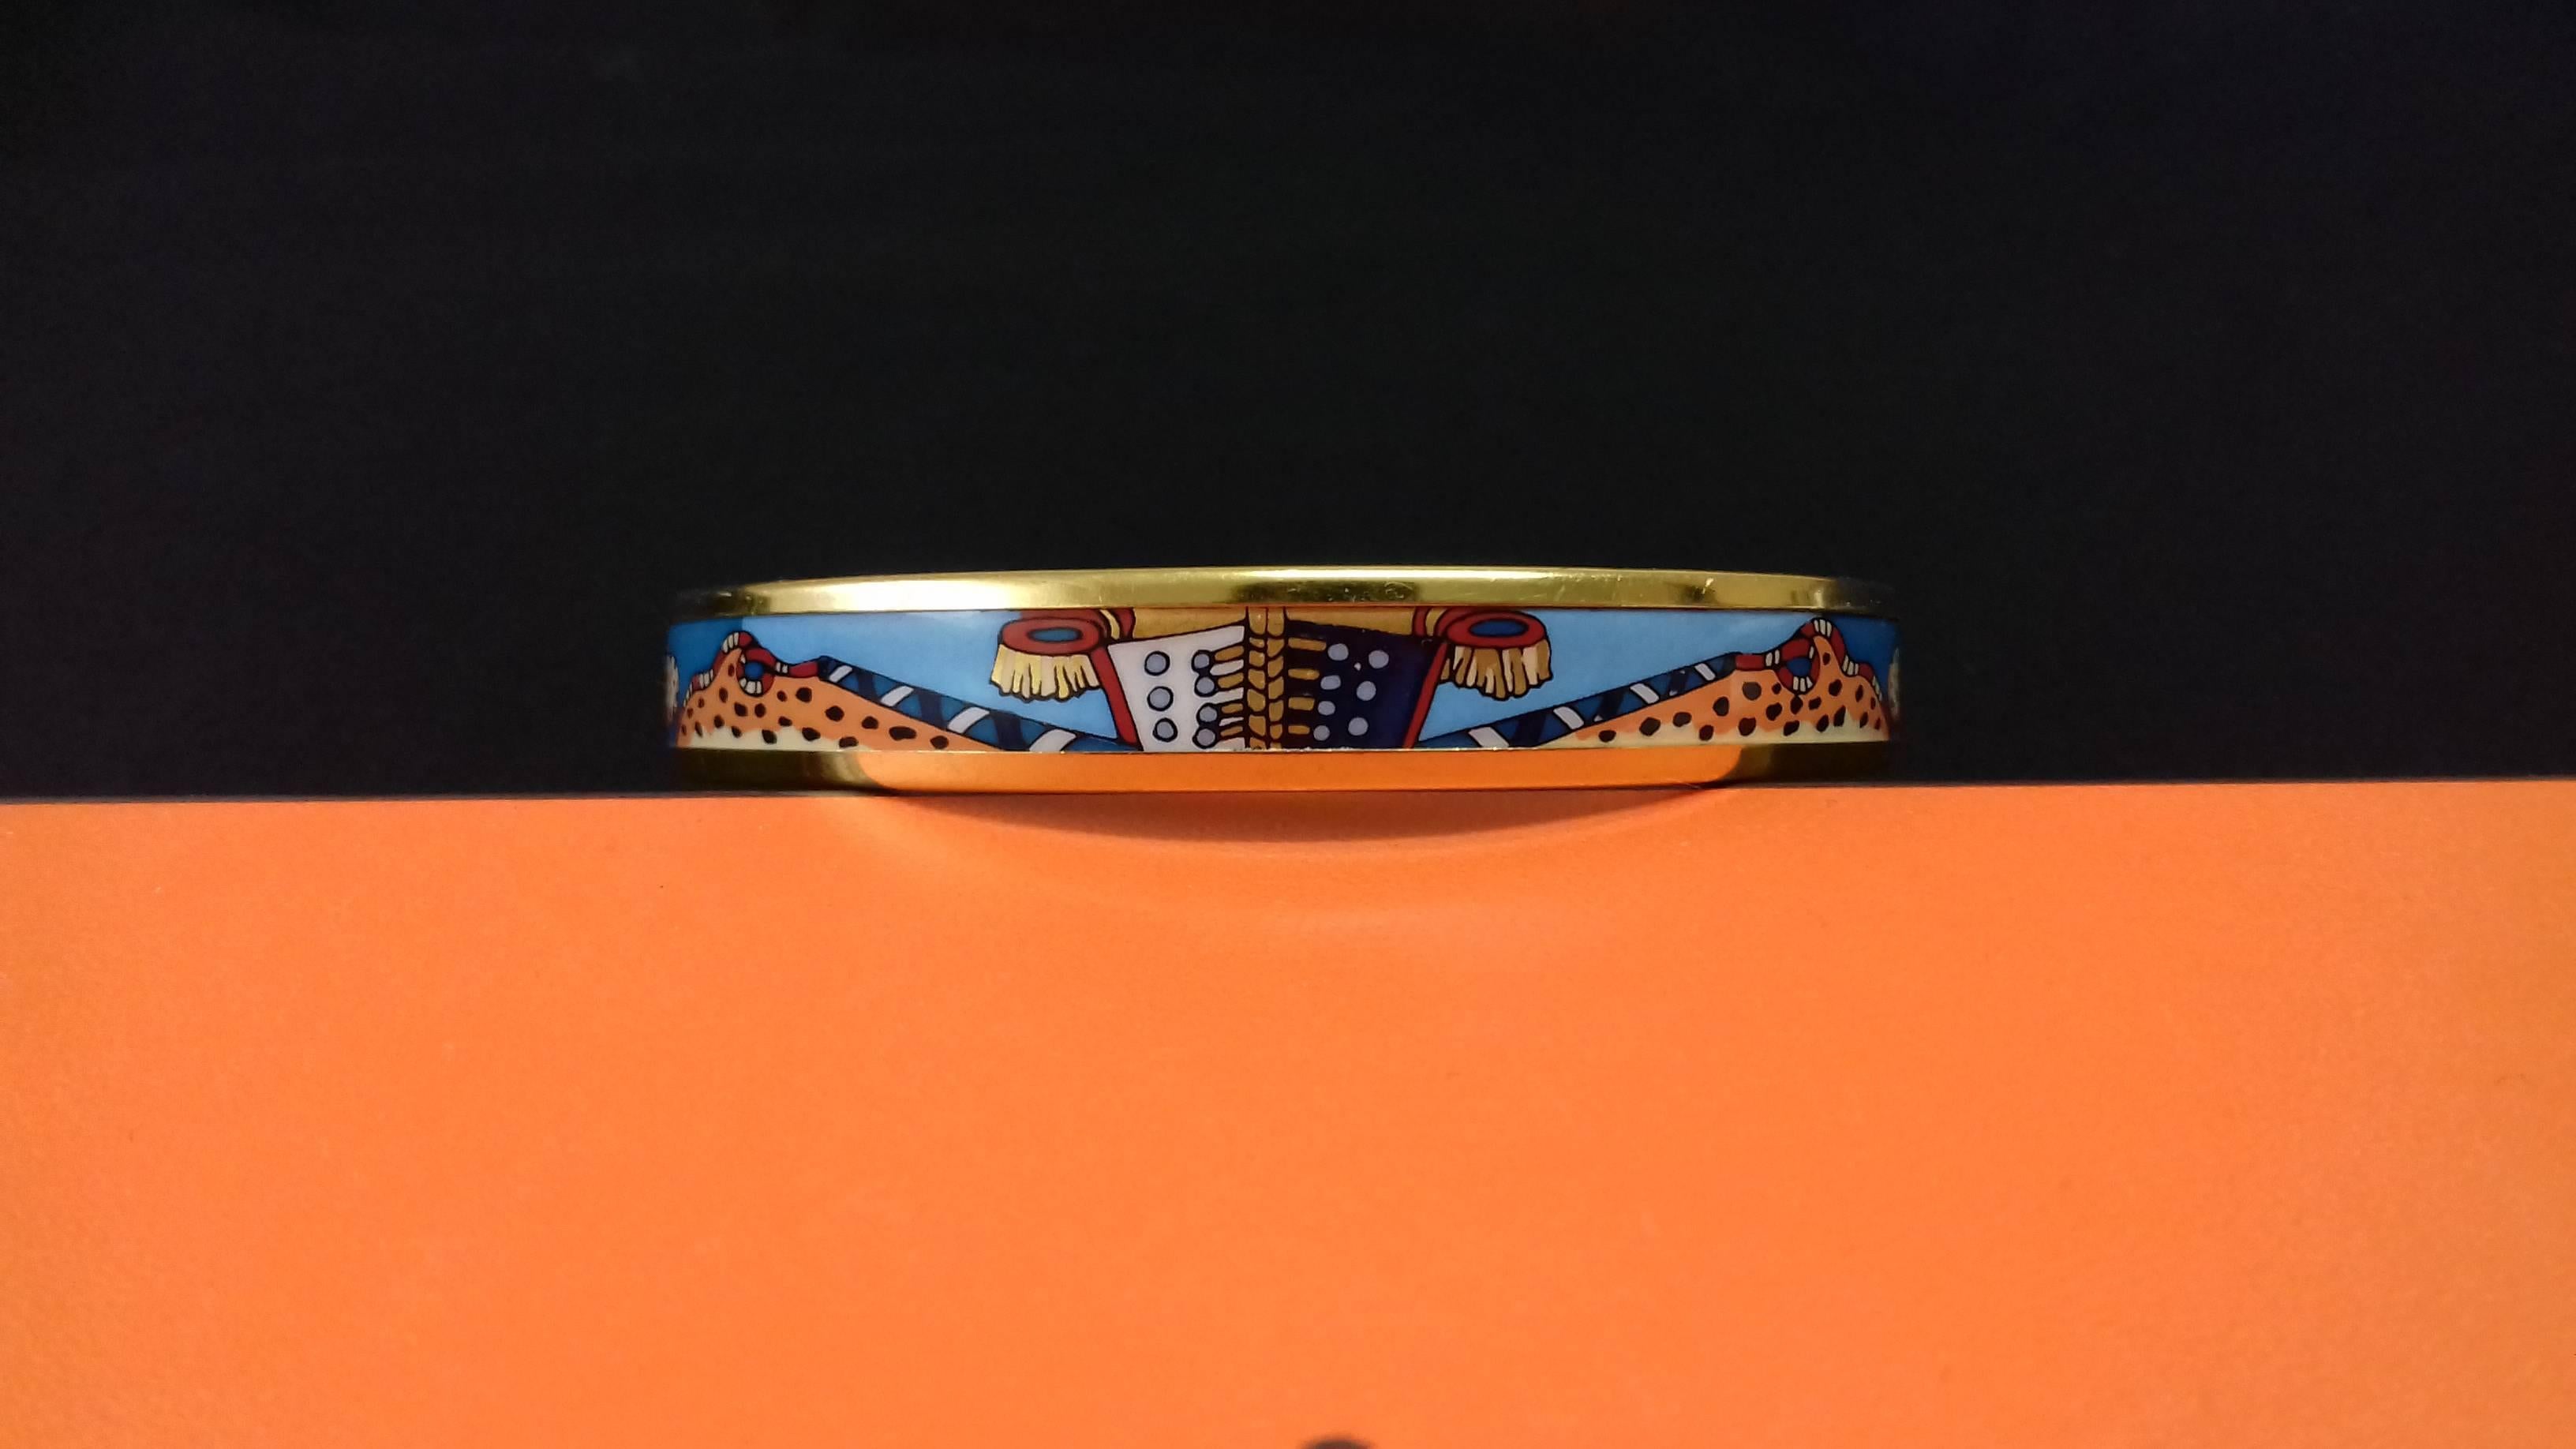 Hard to find Beautiful Authentic Hermès Bracelet 

Pattern: Cheetahs

Made in Austria

Made of Enamel Printed and Gold Plated Hardware

Colorways: Blue, Beige, Pale Yellow, Golden

